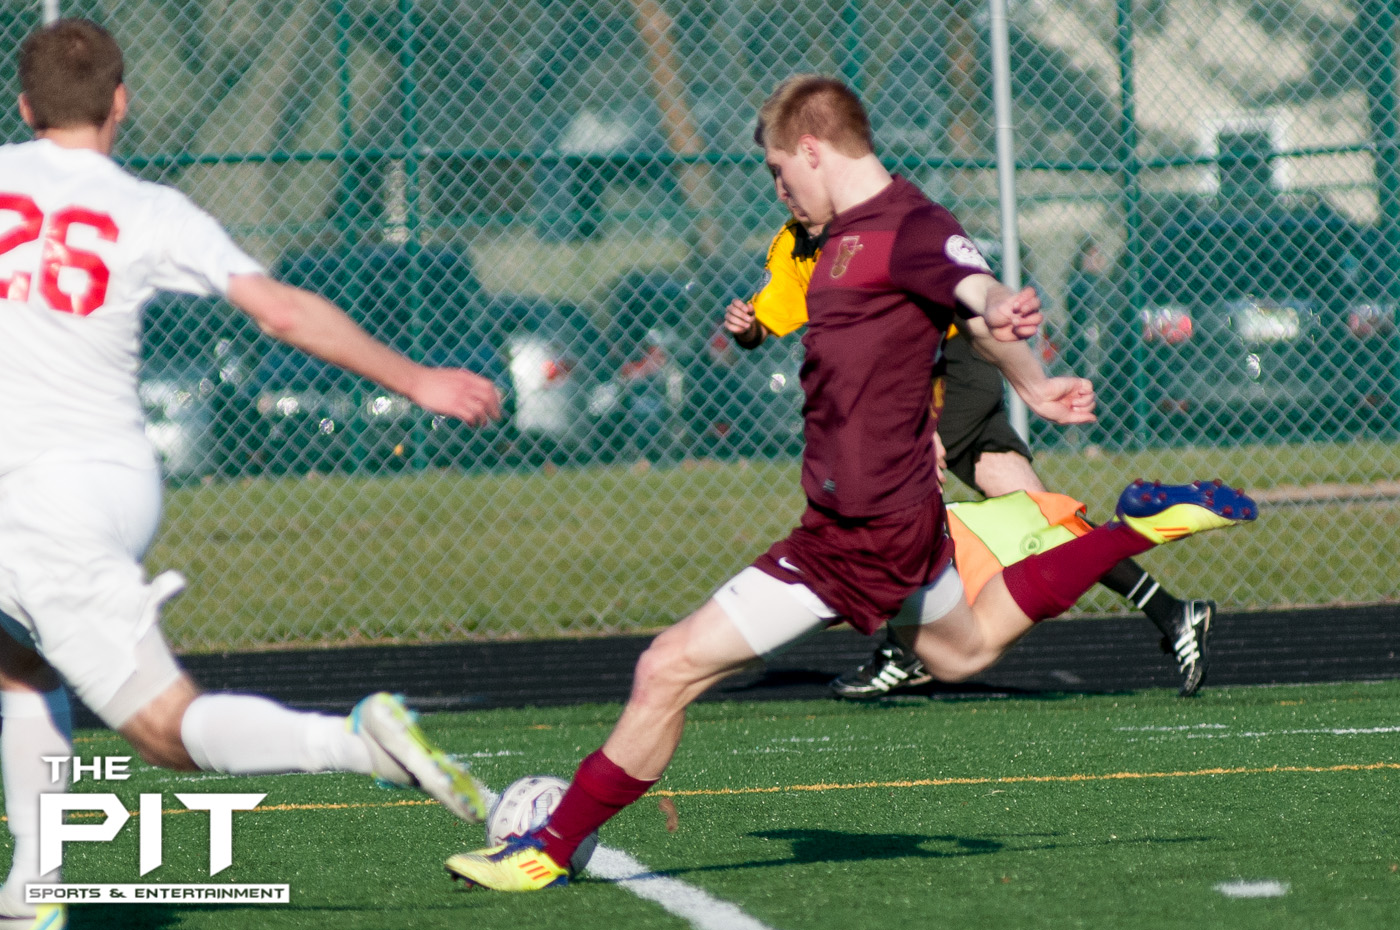 Detroit City FC Forward Zach Meyers (15) makes a shot attempt and scores in the first half of a scrimmage match against Saginaw Valley on April 19, 2014 at Hurley Field. Brian Quintos / The Pit: SE